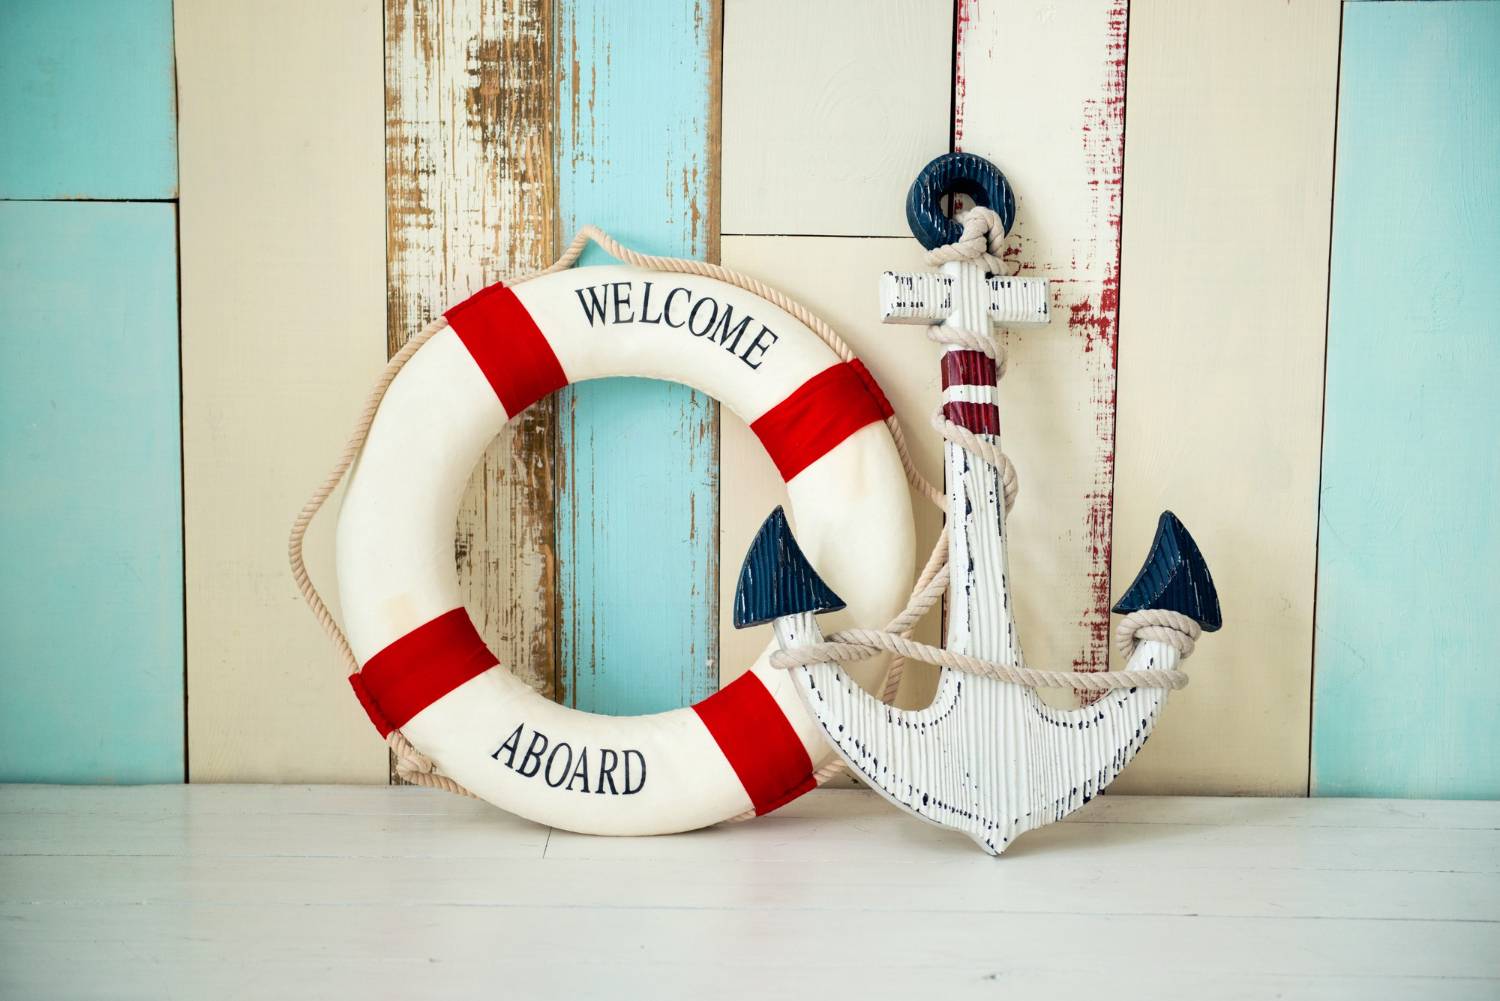 Lifebuoy and anchor against a rustic wood backdrop, with a nautical theme.